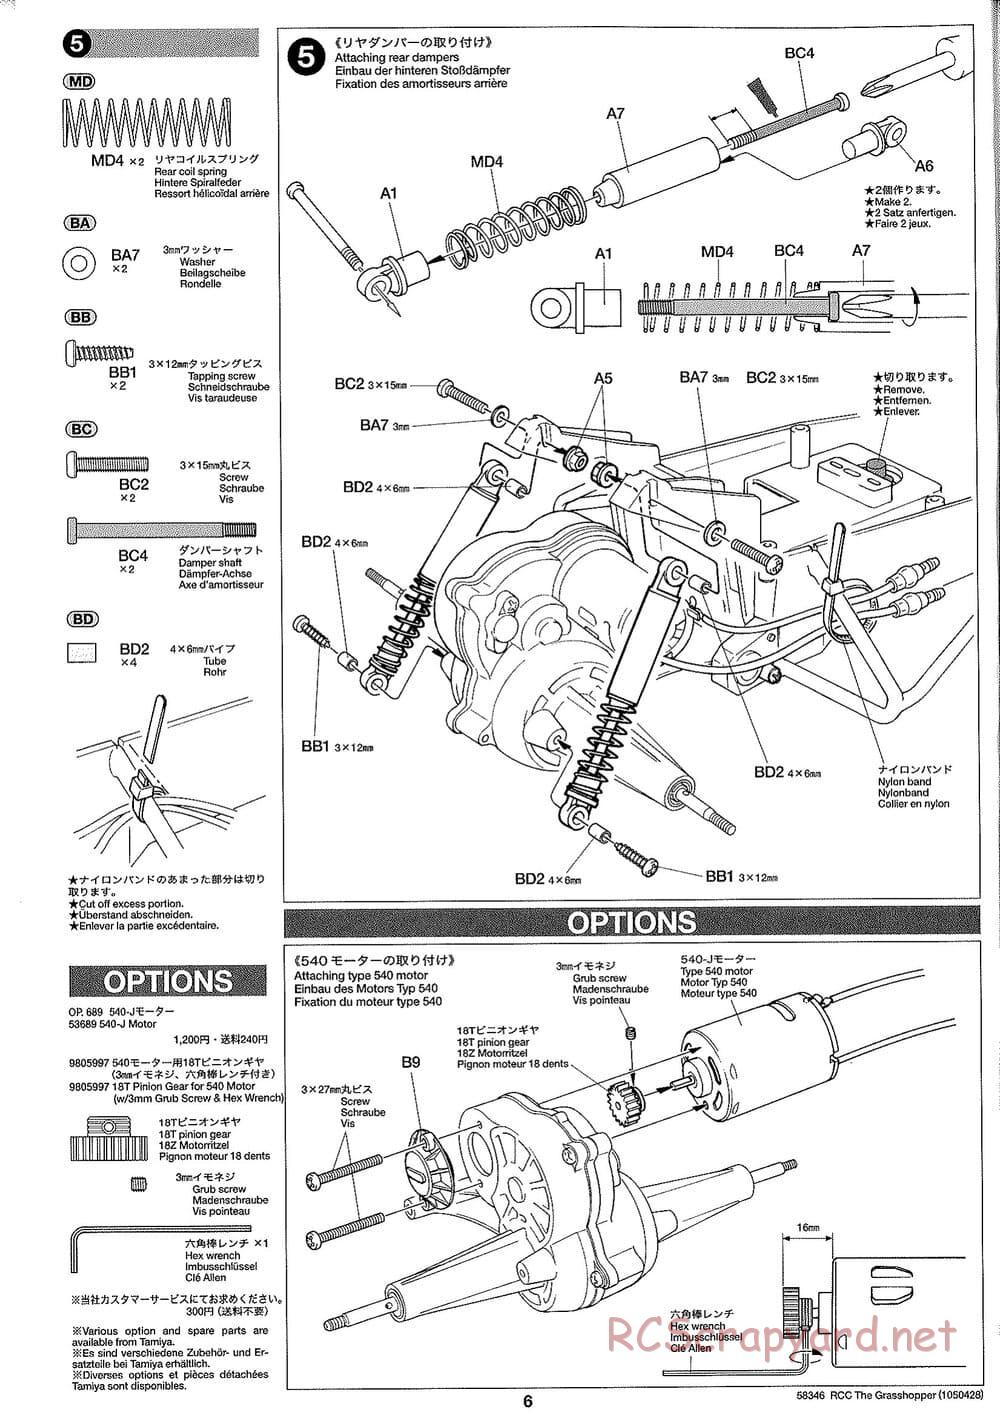 Tamiya - The Grasshopper (2005) - GH Chassis - Manual - Page 6